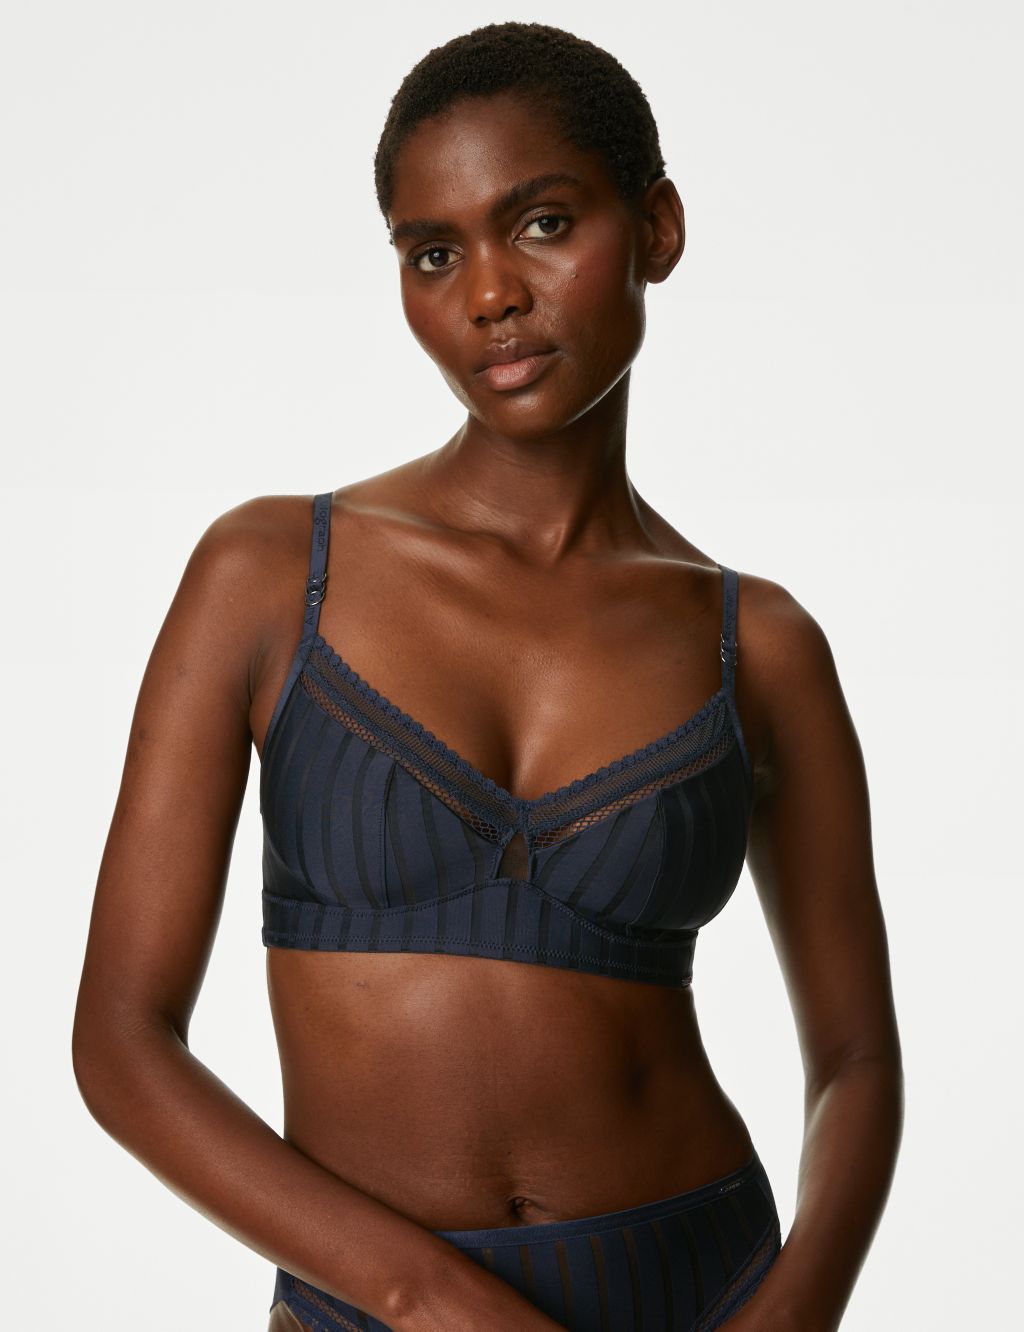 This M&S Bralette has rave reviews, but does it live up to the hype?